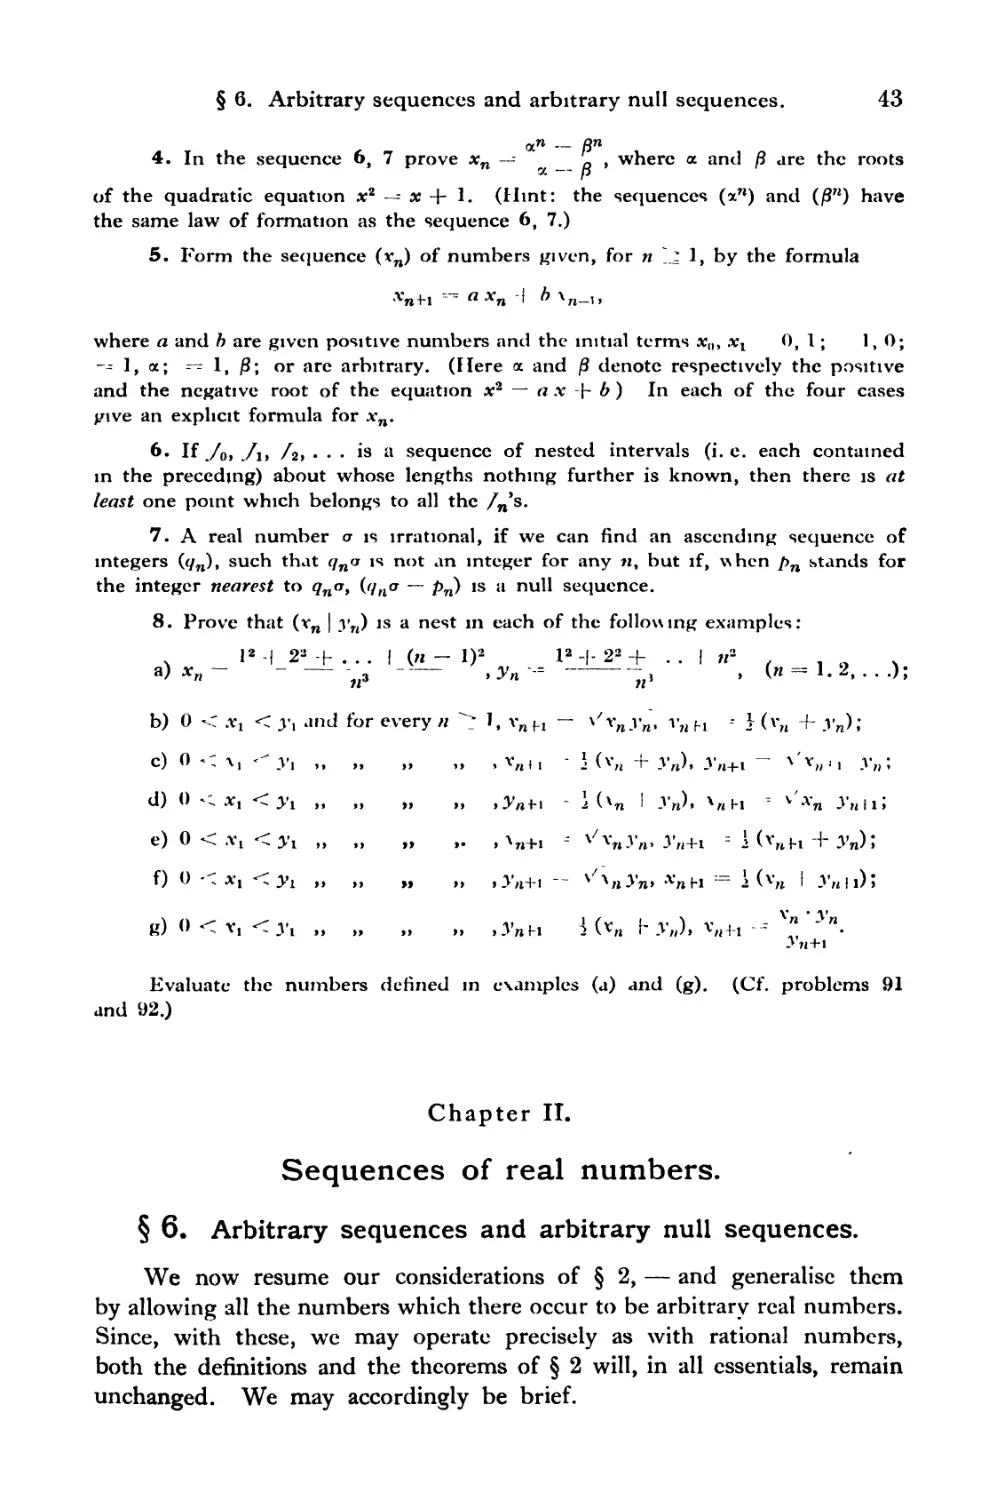 Chapter II. Sequences of real numbers